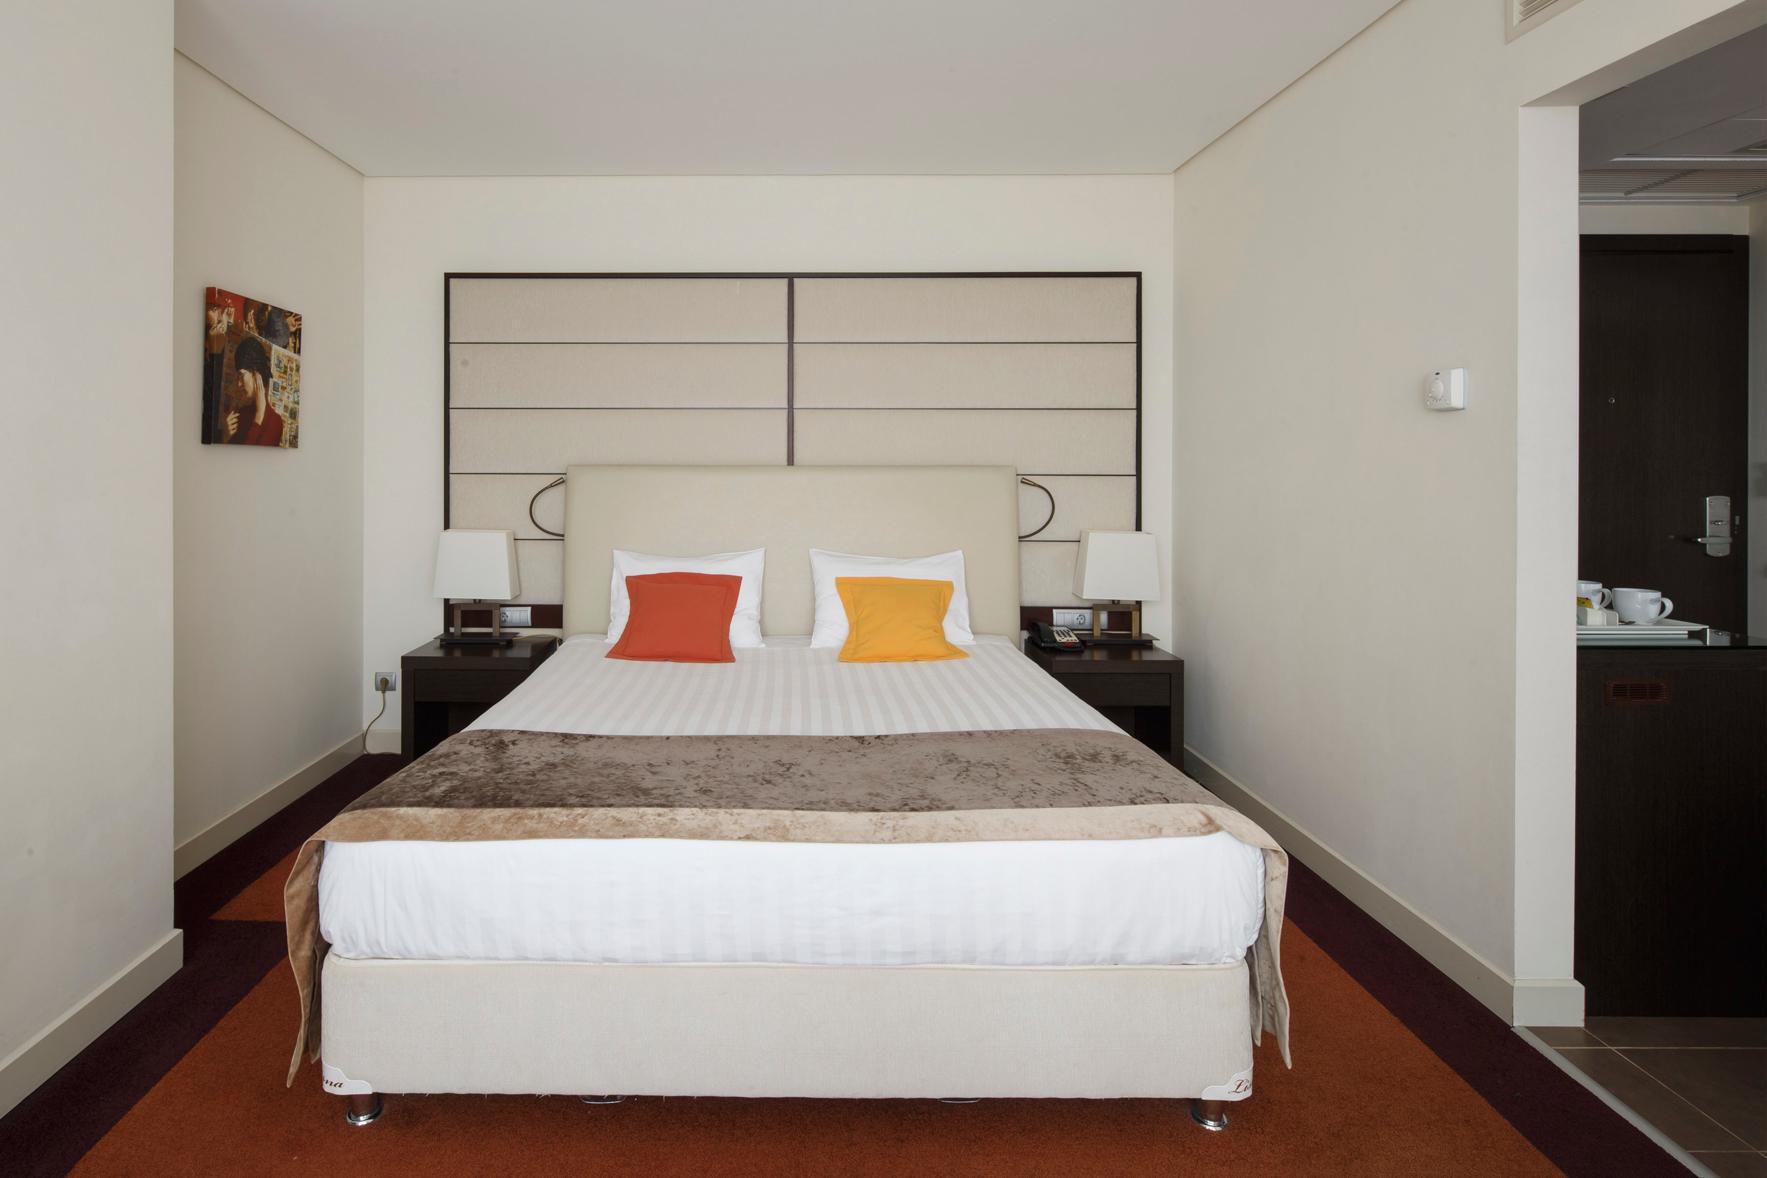 Comfortable room provides a retreat at the end of a working day.